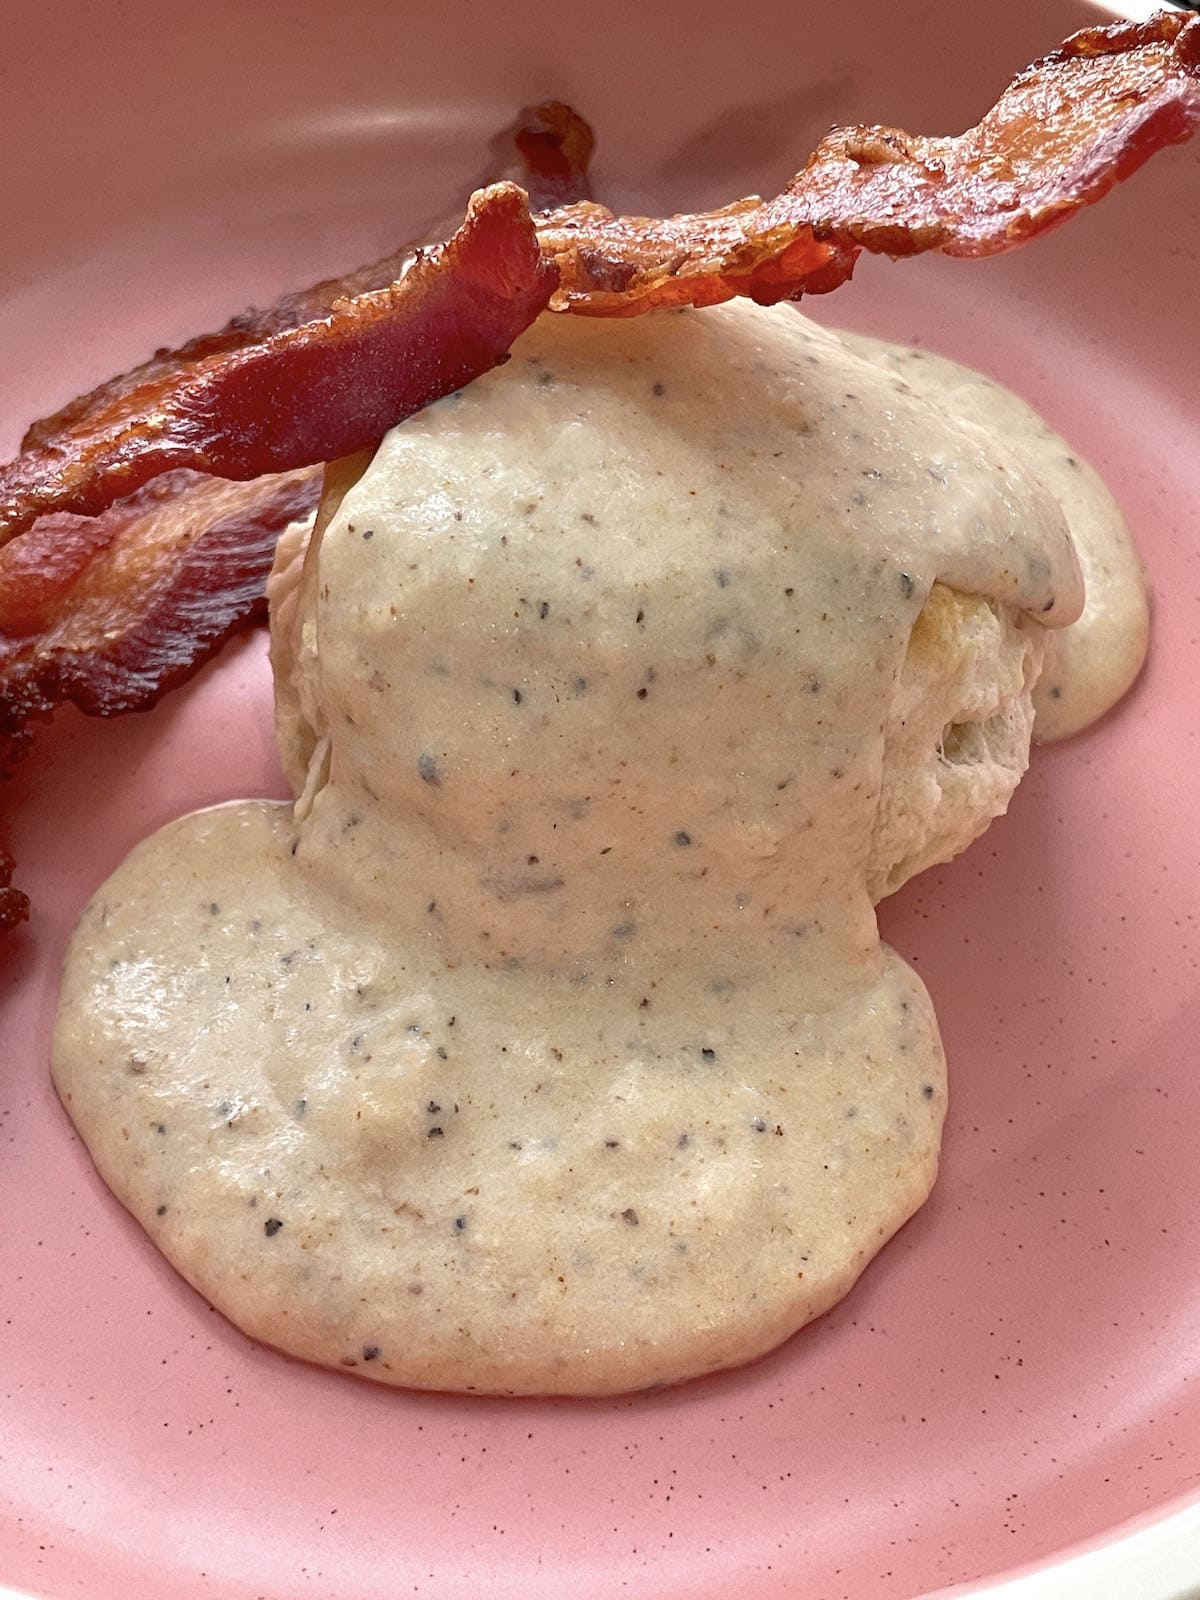 Two biscuits with two strips of bacon smothered with bacon gravy in a pink bowl.